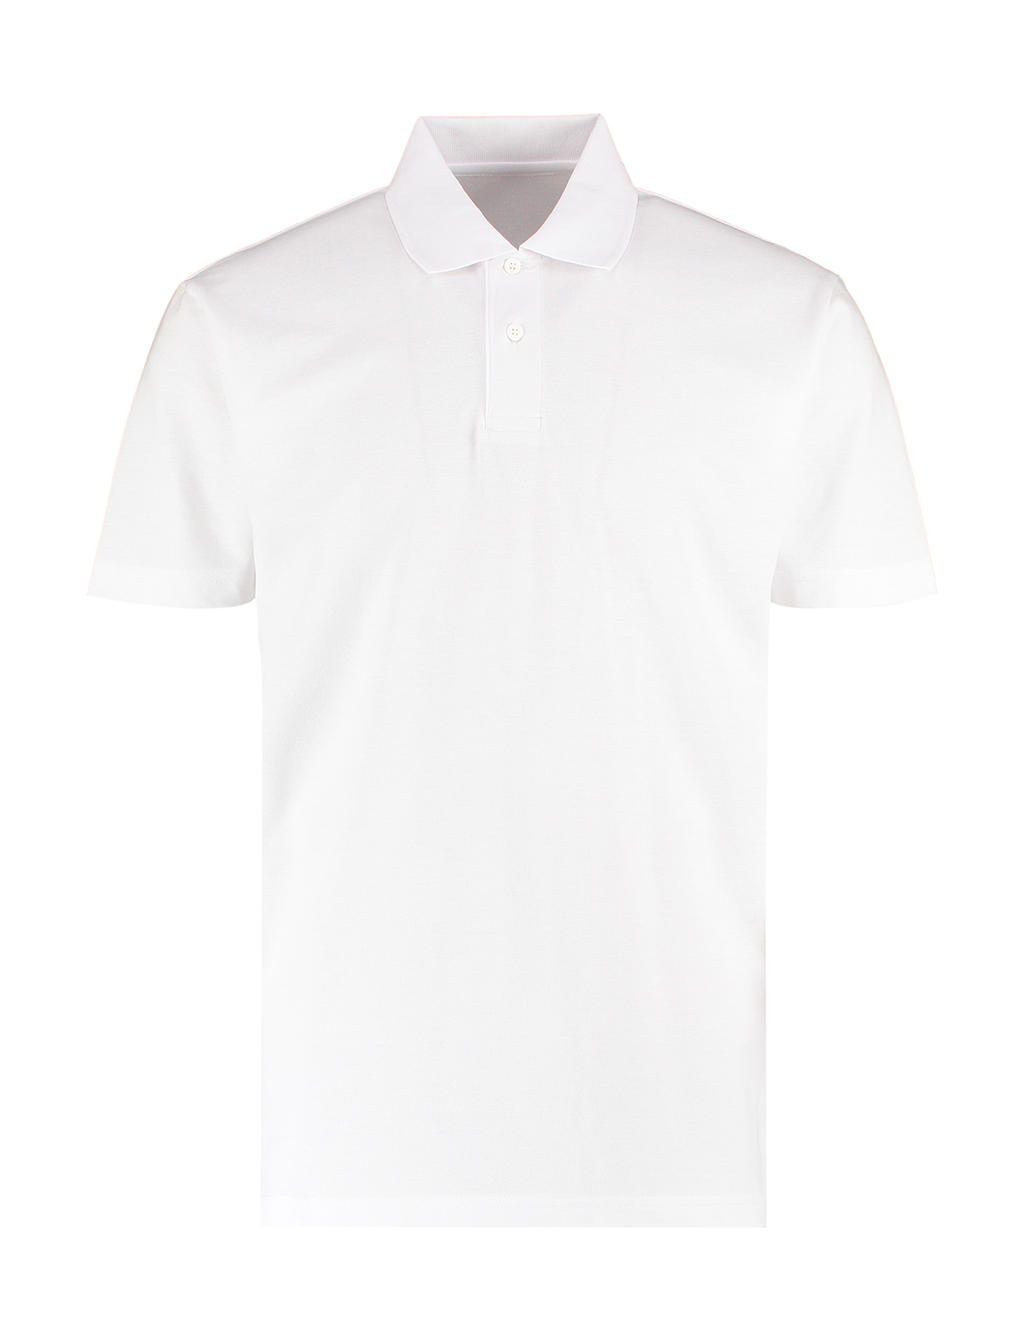  Mens Regular Fit Workforce Polo in Farbe White